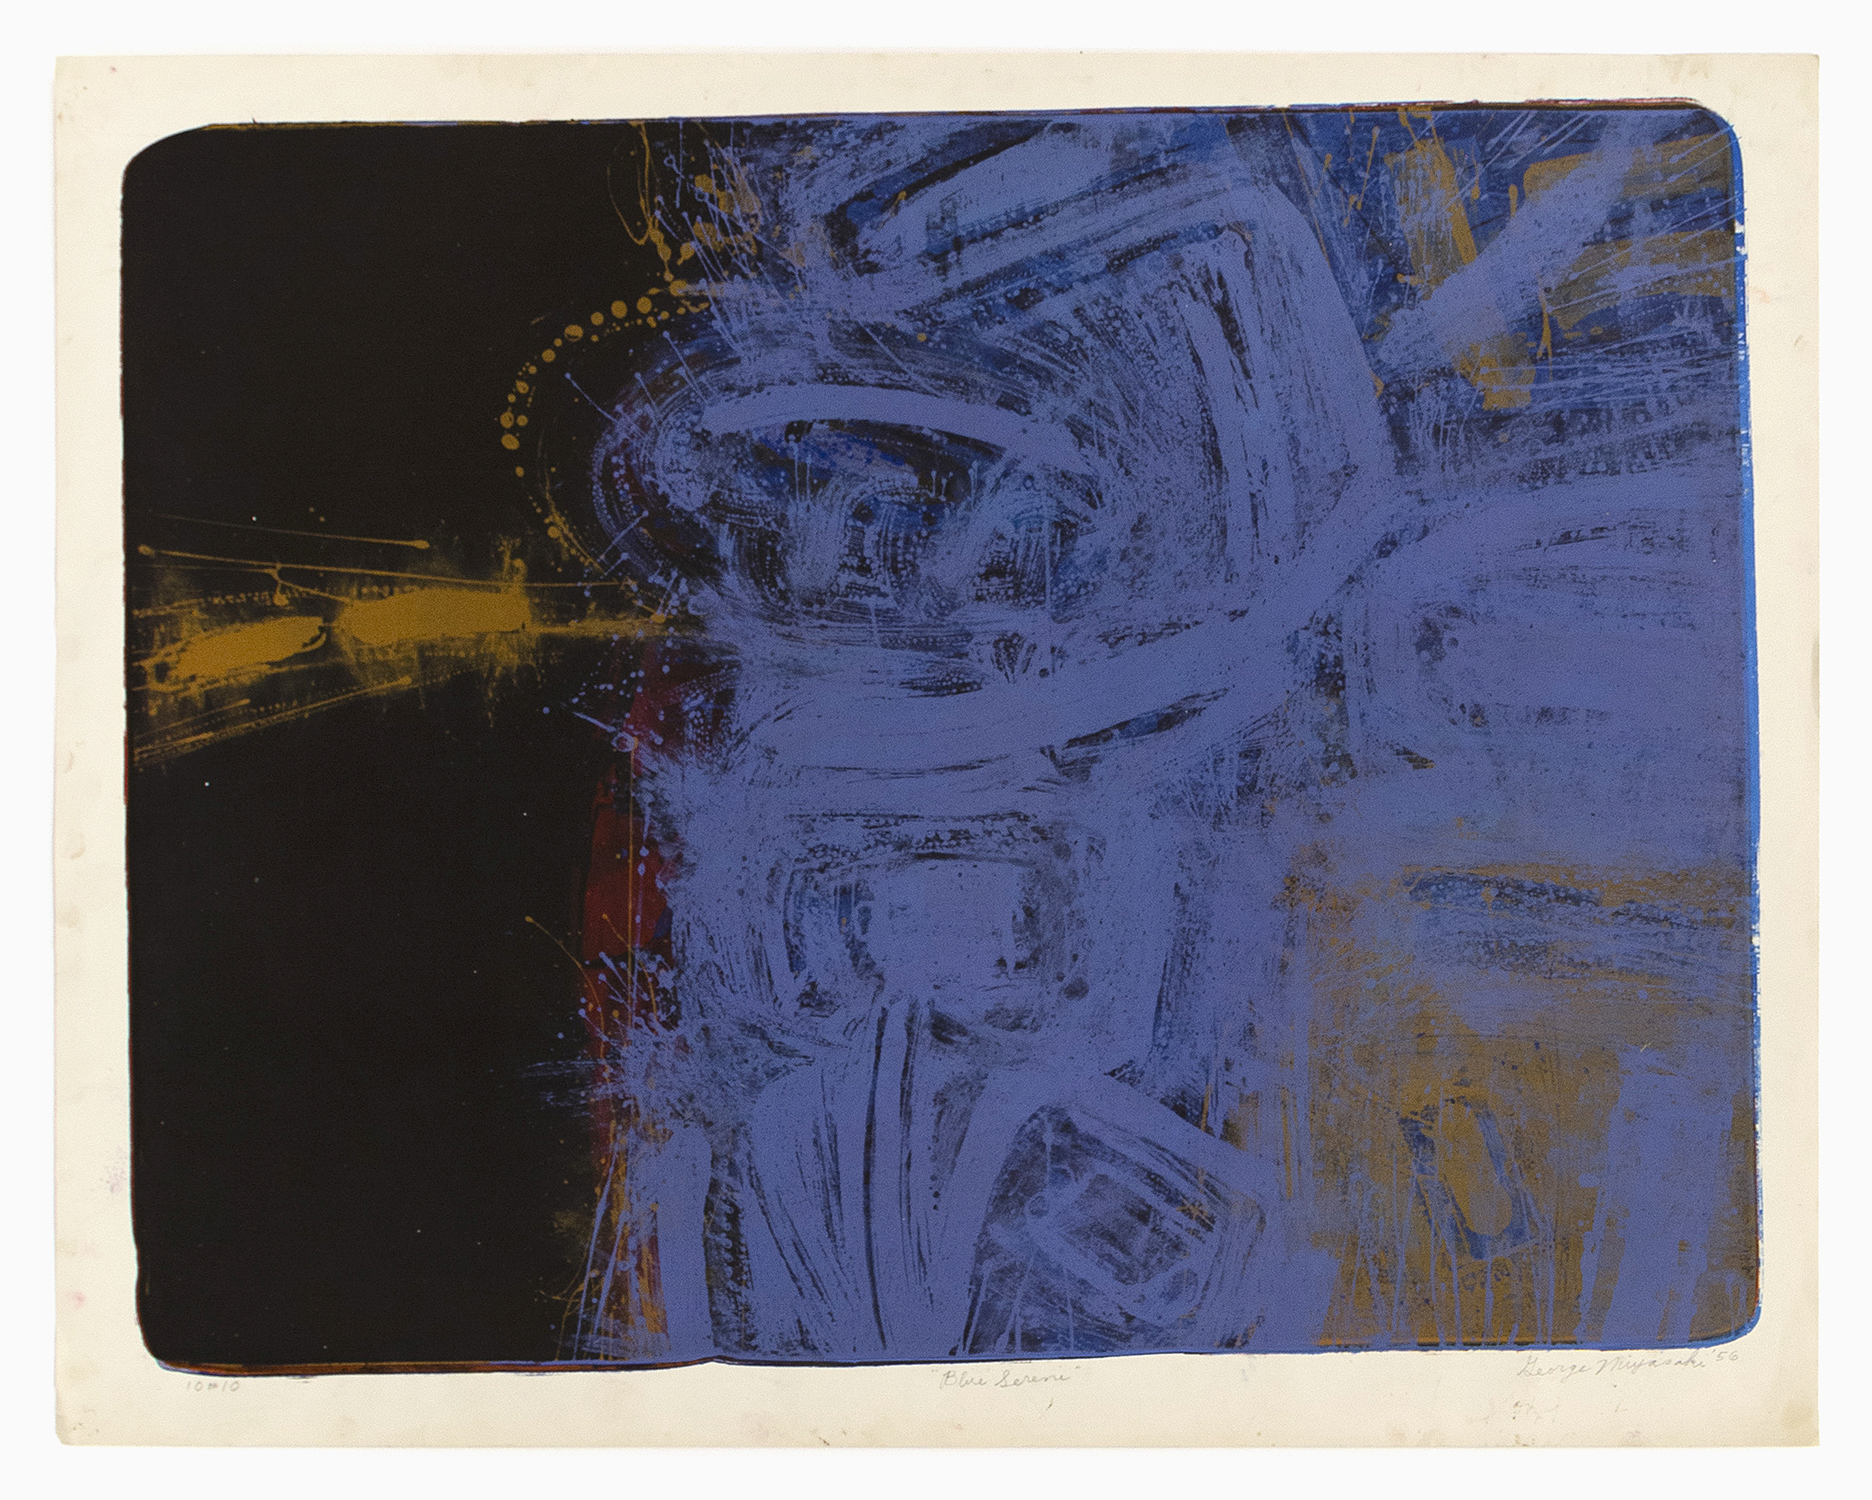 Blue Serene, 1956, Lithograph, 20 1/2 x 26 1/2 inches (52.1 x 67.3 cm), Edition of 10